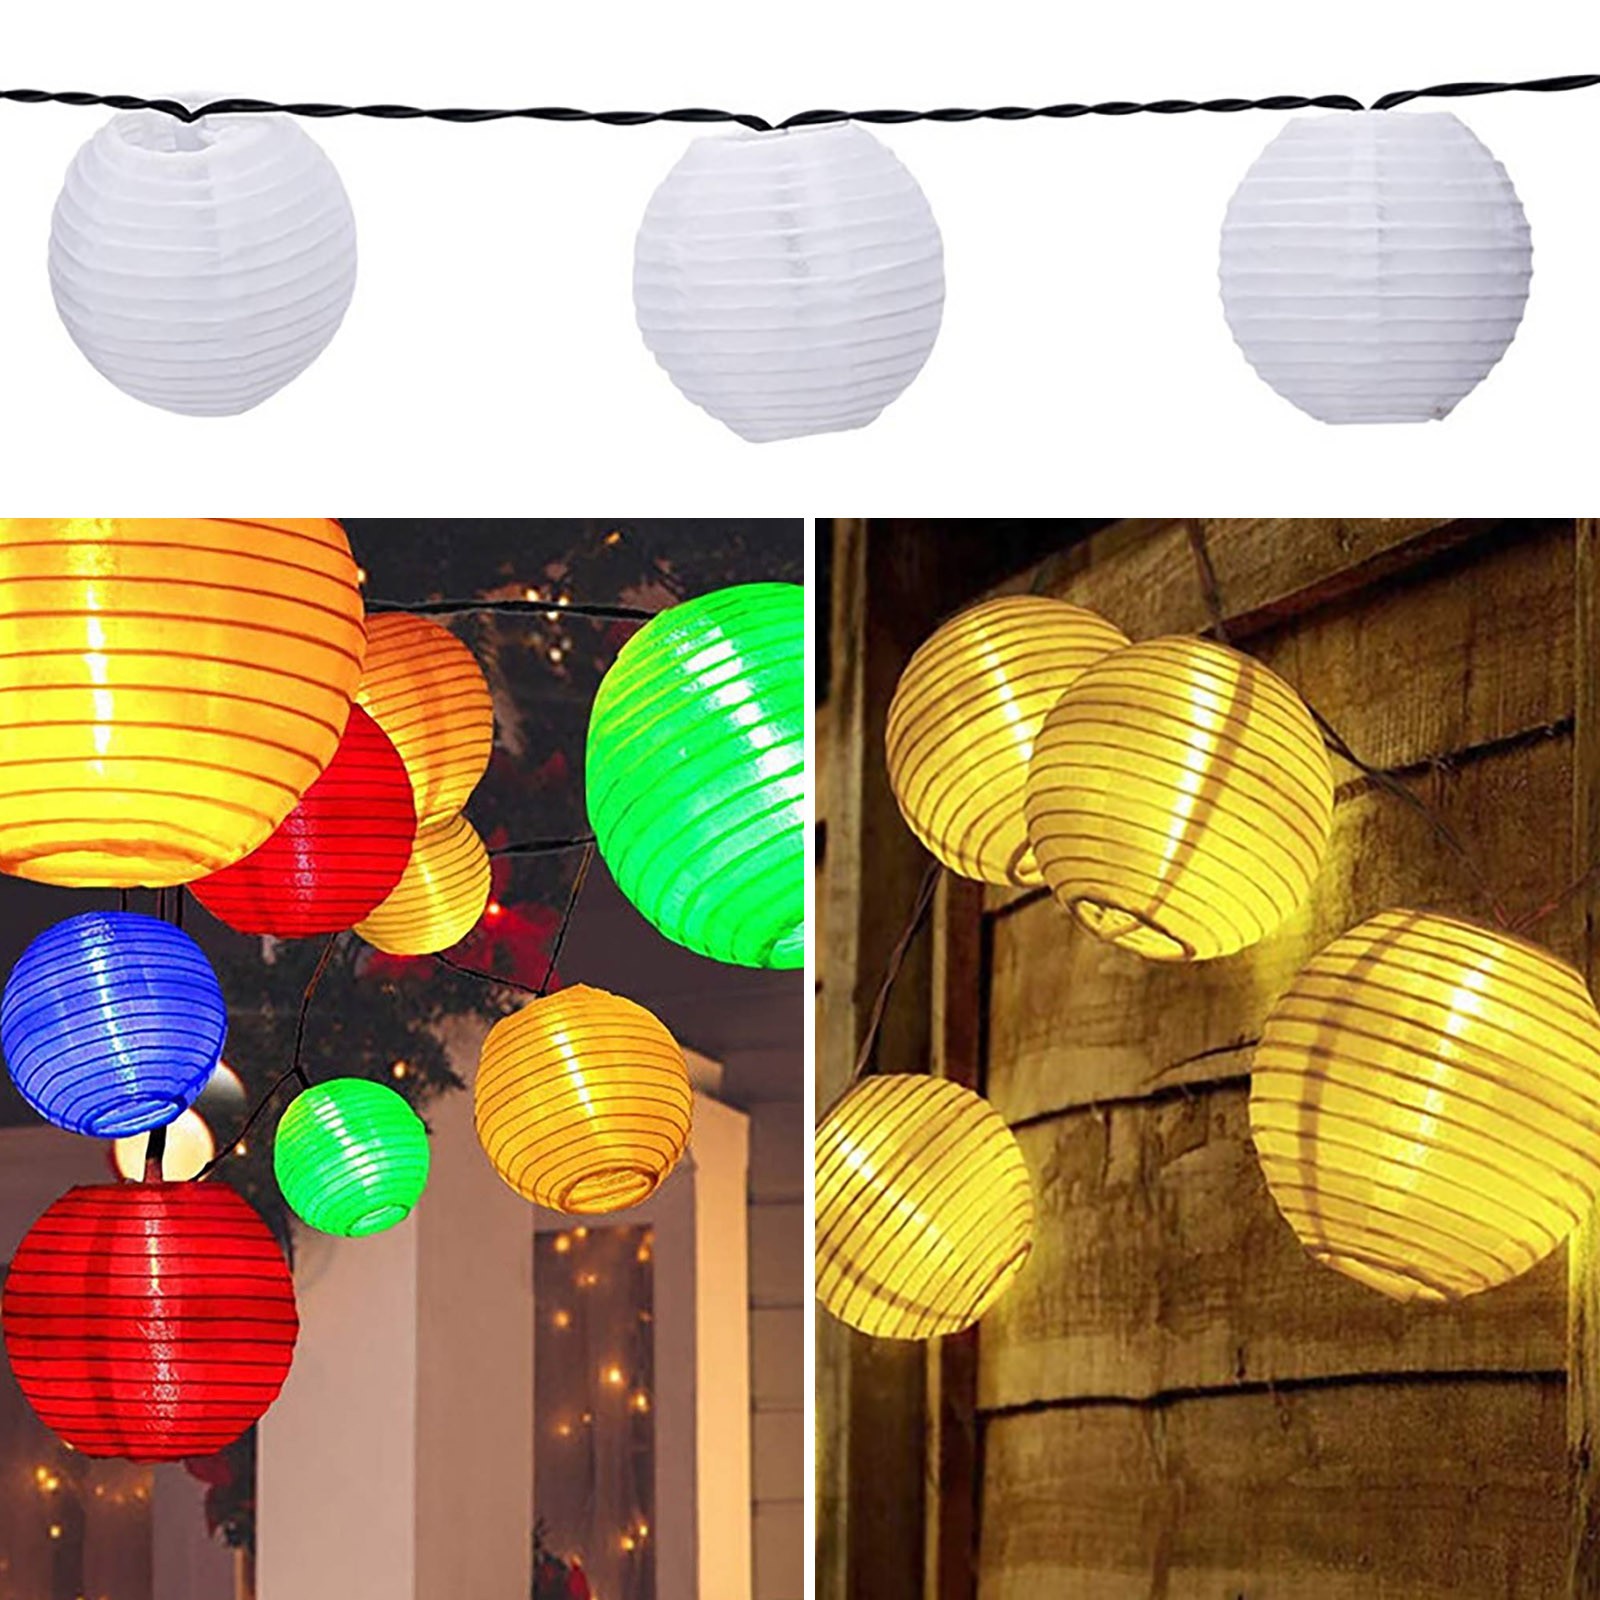 Led Dome Christmas Lights Solar Garden Lamp Waterproof 10 Outdoor Solar String Lights For Garden Outdoor Wedding Party 20led Warm Lights Wire - image 4 of 9